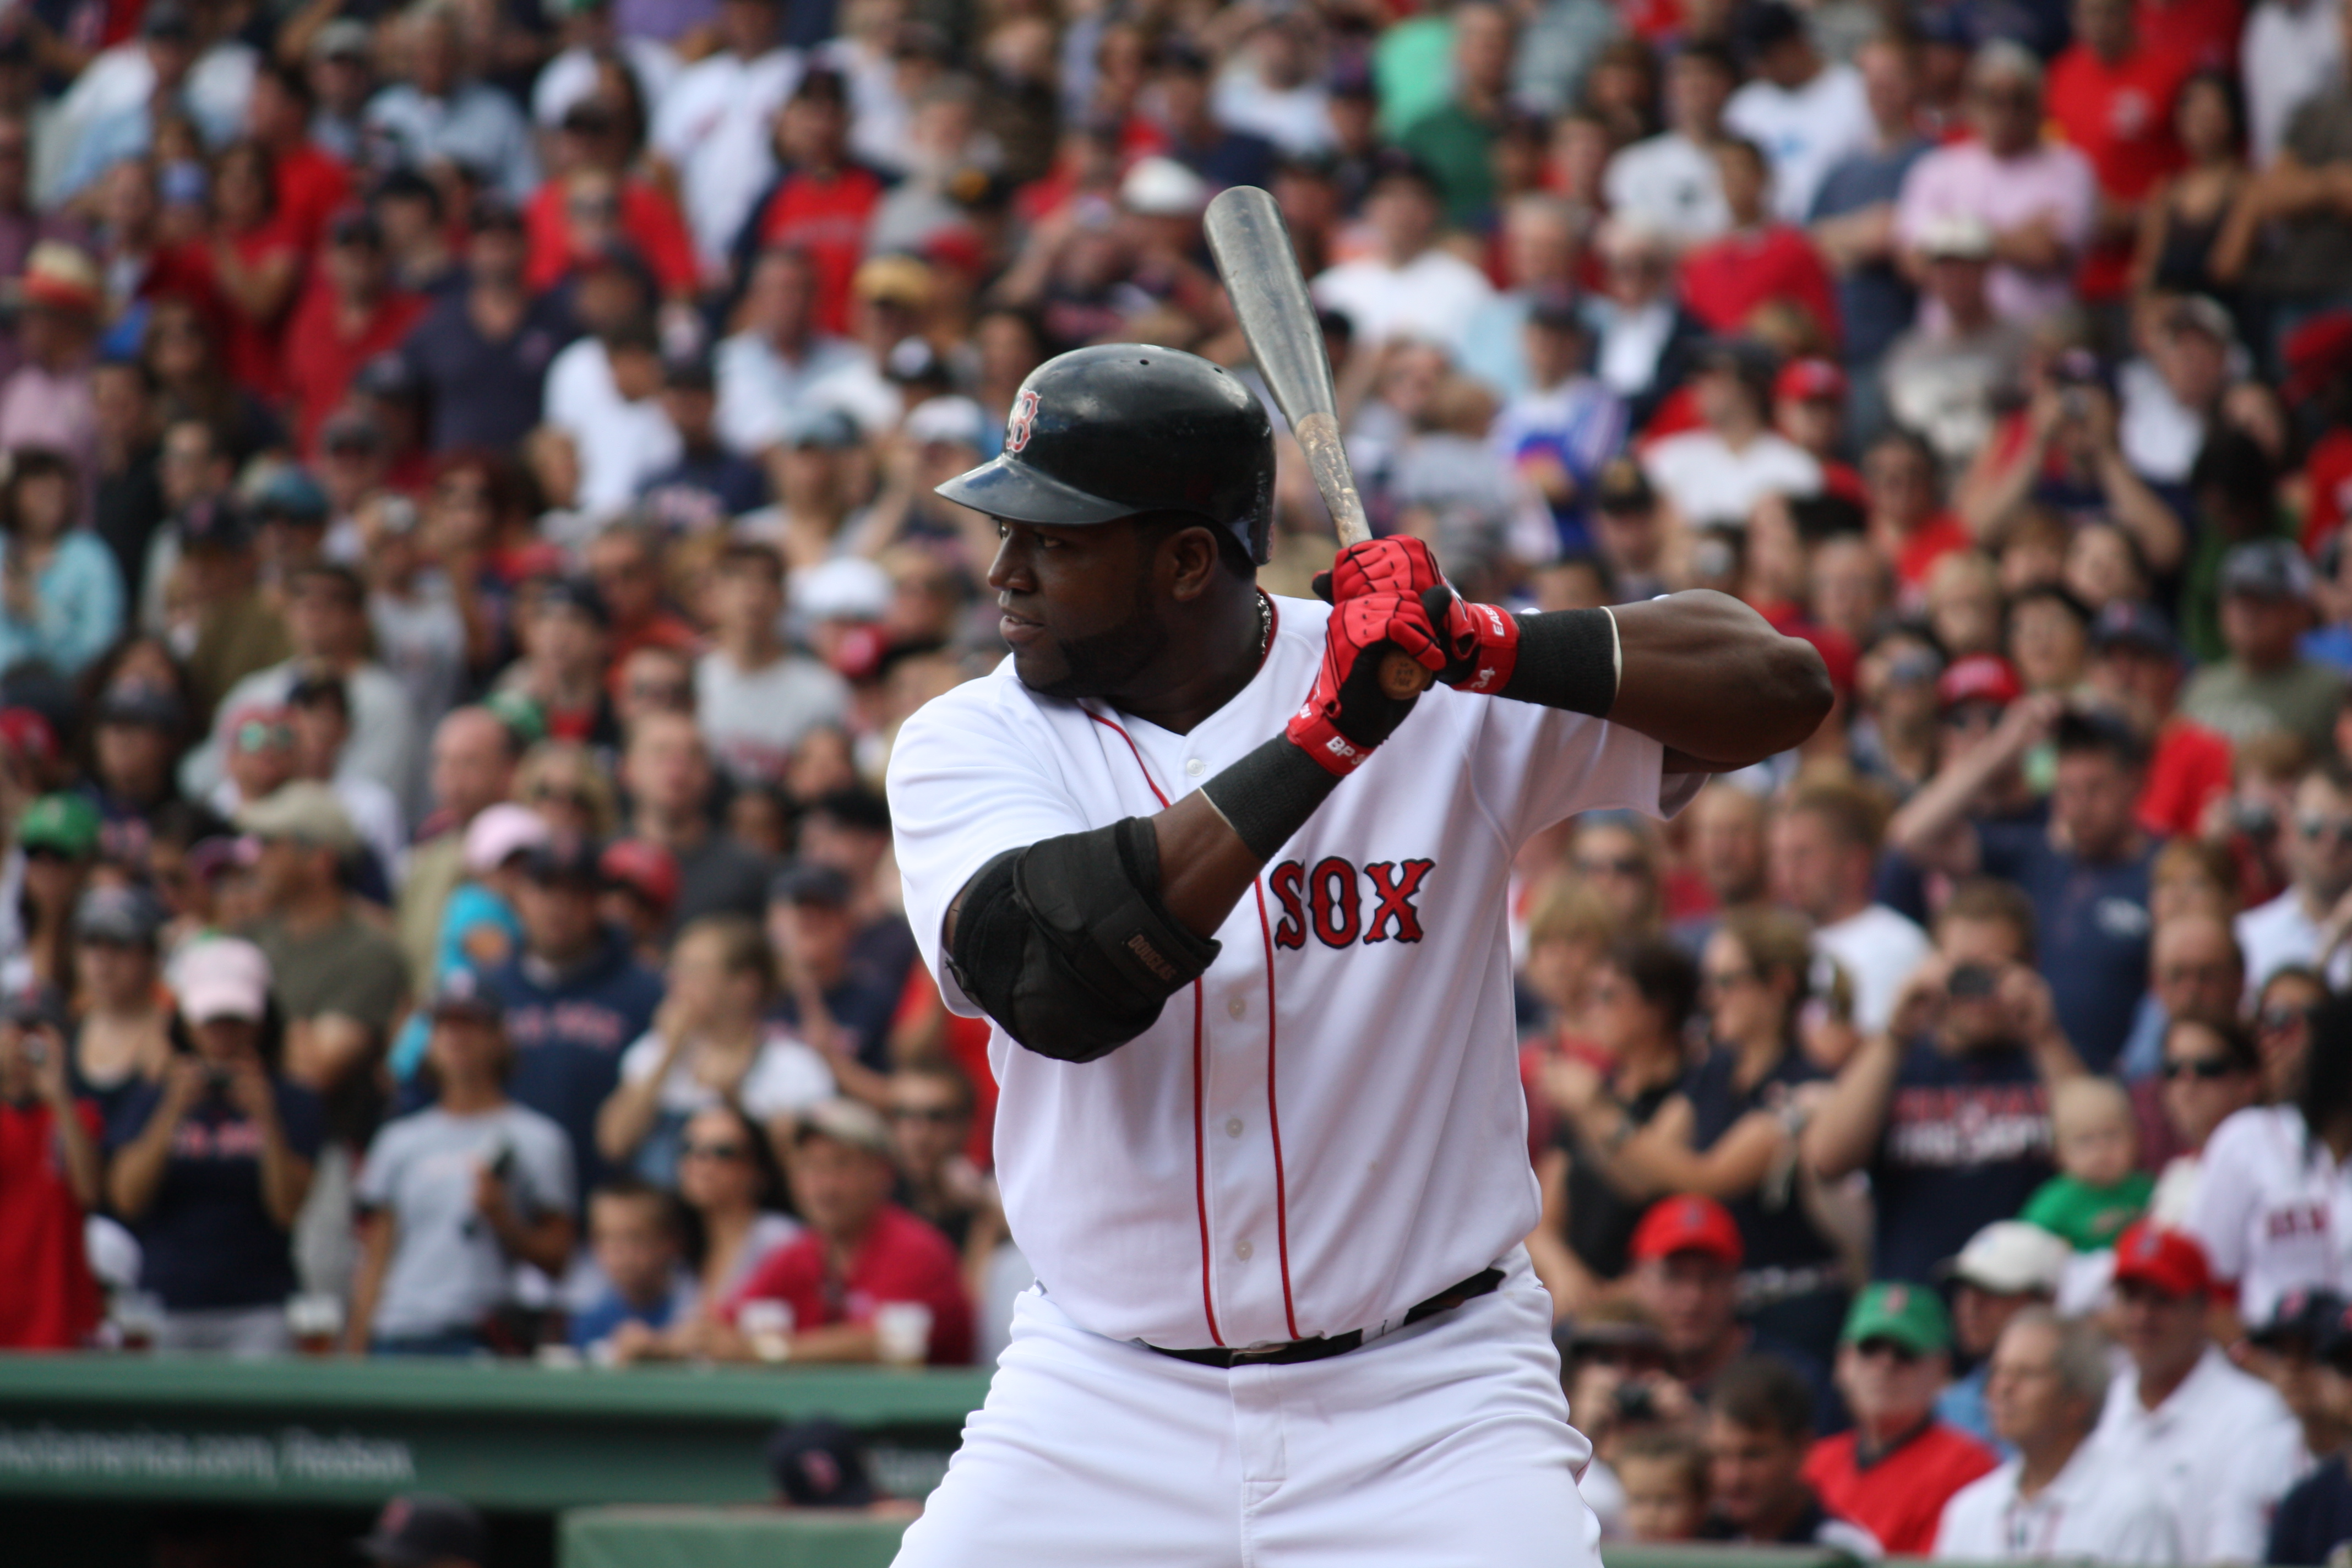 An Ode to Big Papi, Boston's Unlikely Hero